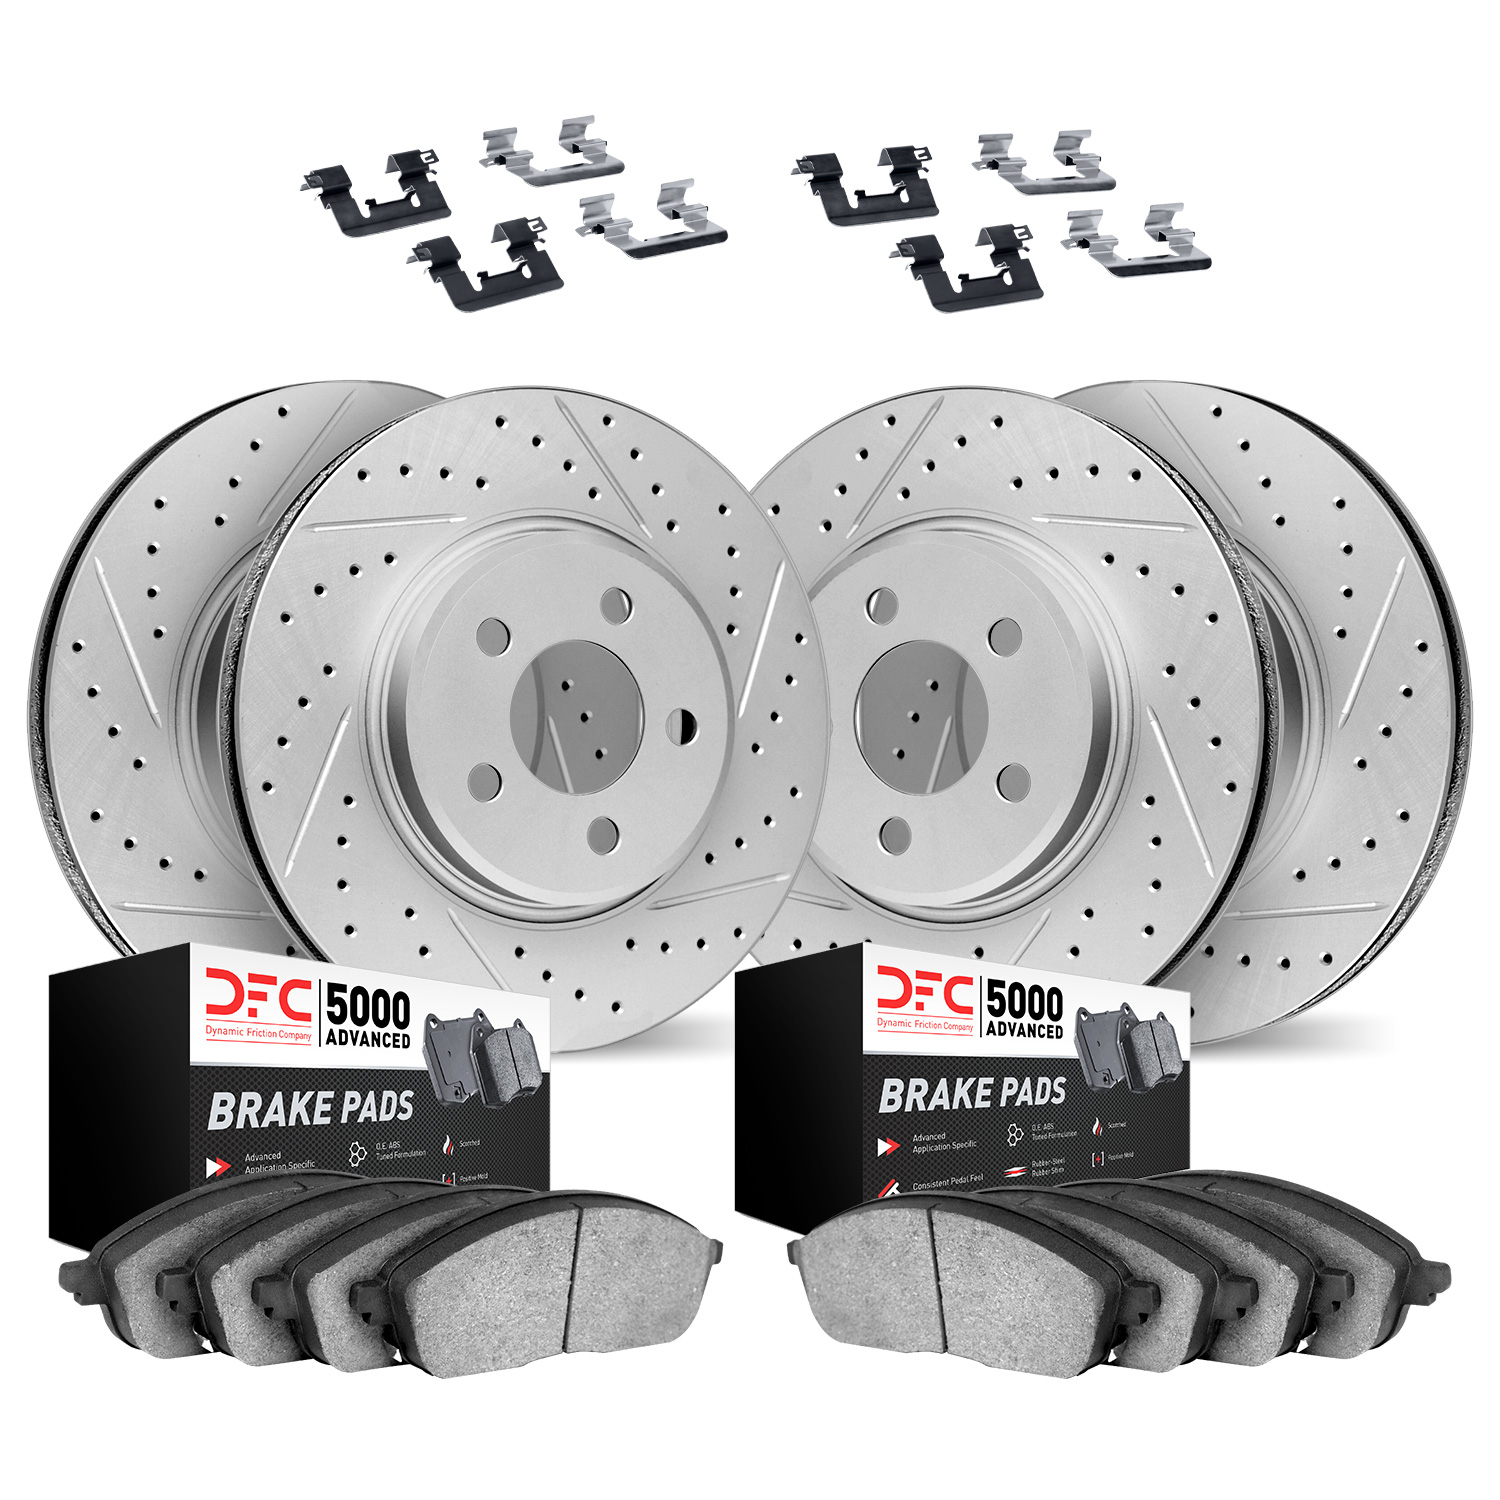 2514-65007 Geoperformance Drilled/Slotted Rotors w/5000 Advanced Brake Pads Kit & Hardware, 2011-2011 GM, Position: Front and Re